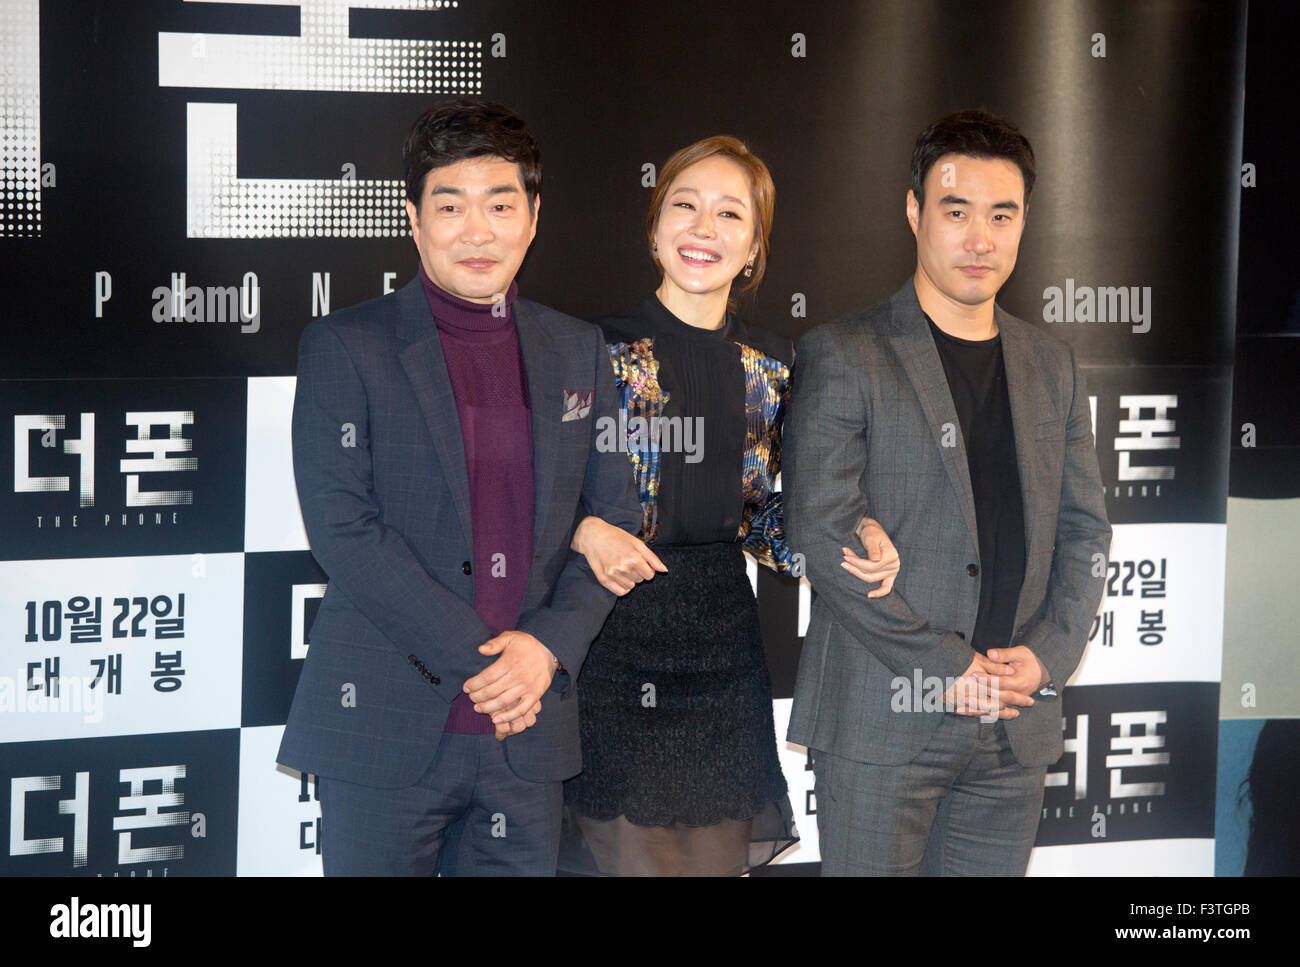 Son Hyeon-joo, Eom Ji-won, Bae Seong-woo, Oct 12, 2015 : South Korean actors Son Hyeon-joo (L) and Bae Seong-woo (R) pose with actress Eom Ji-won during a press preview of their new movie, The Phone, in Seoul, South Korea. © Lee Jae-Won/AFLO/Alamy Live News Stock Photo